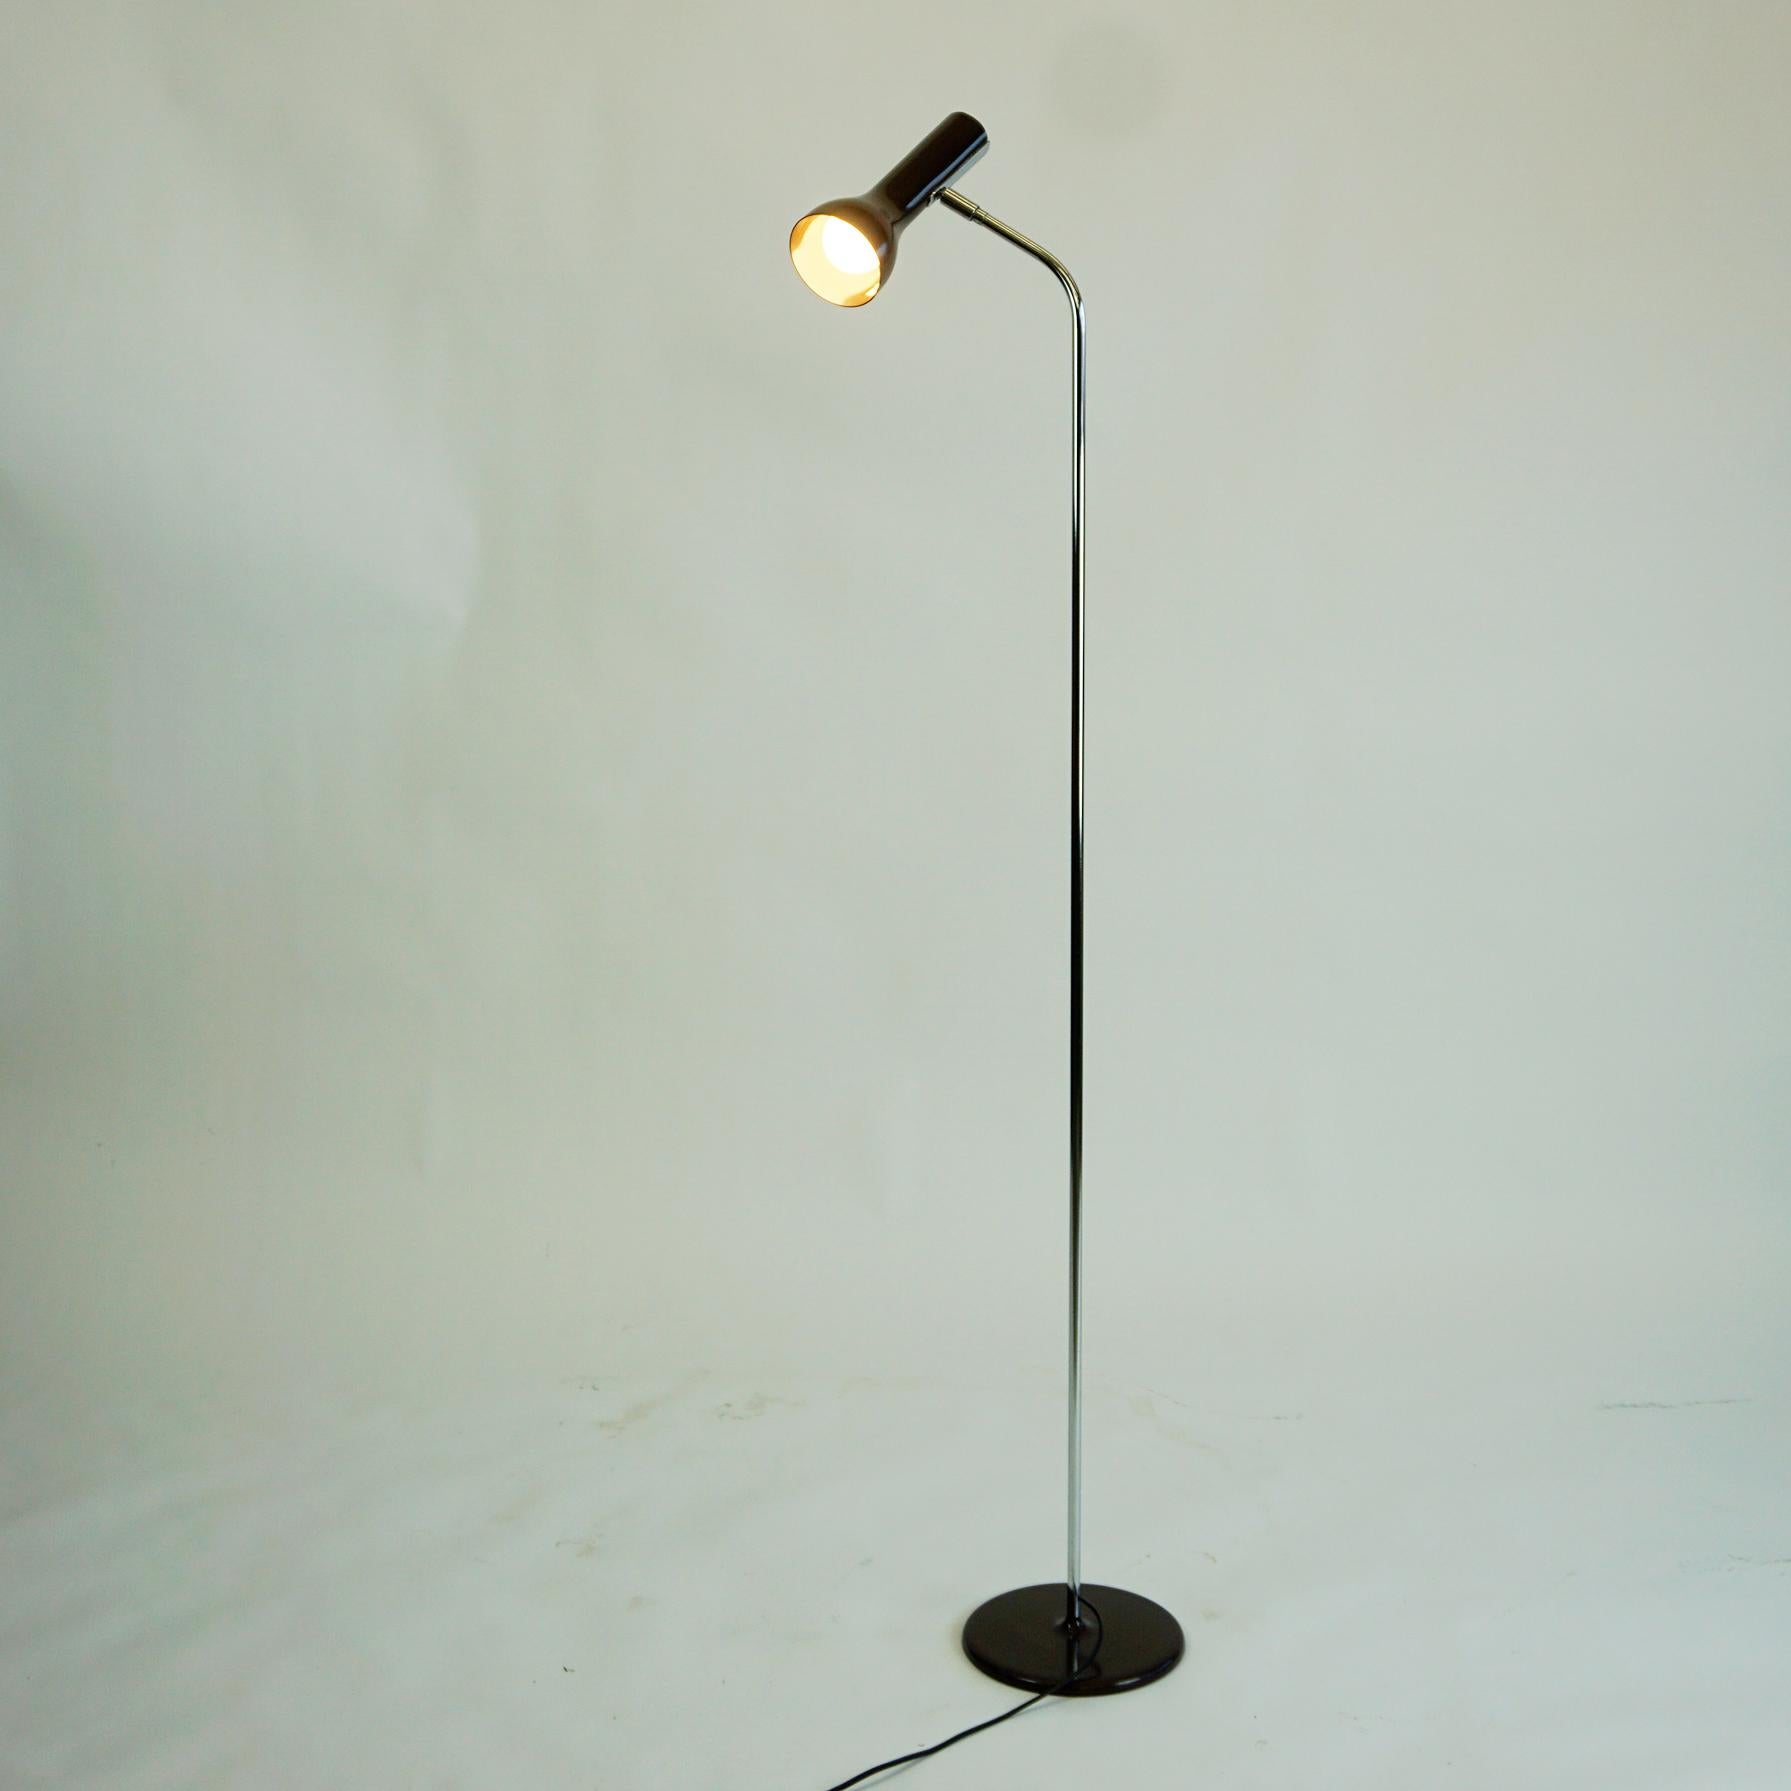 Mid-Century Modern Chocolate Brown 1960s Chrome Spot Floor Lamp by LAD Team for Swiss Lamps